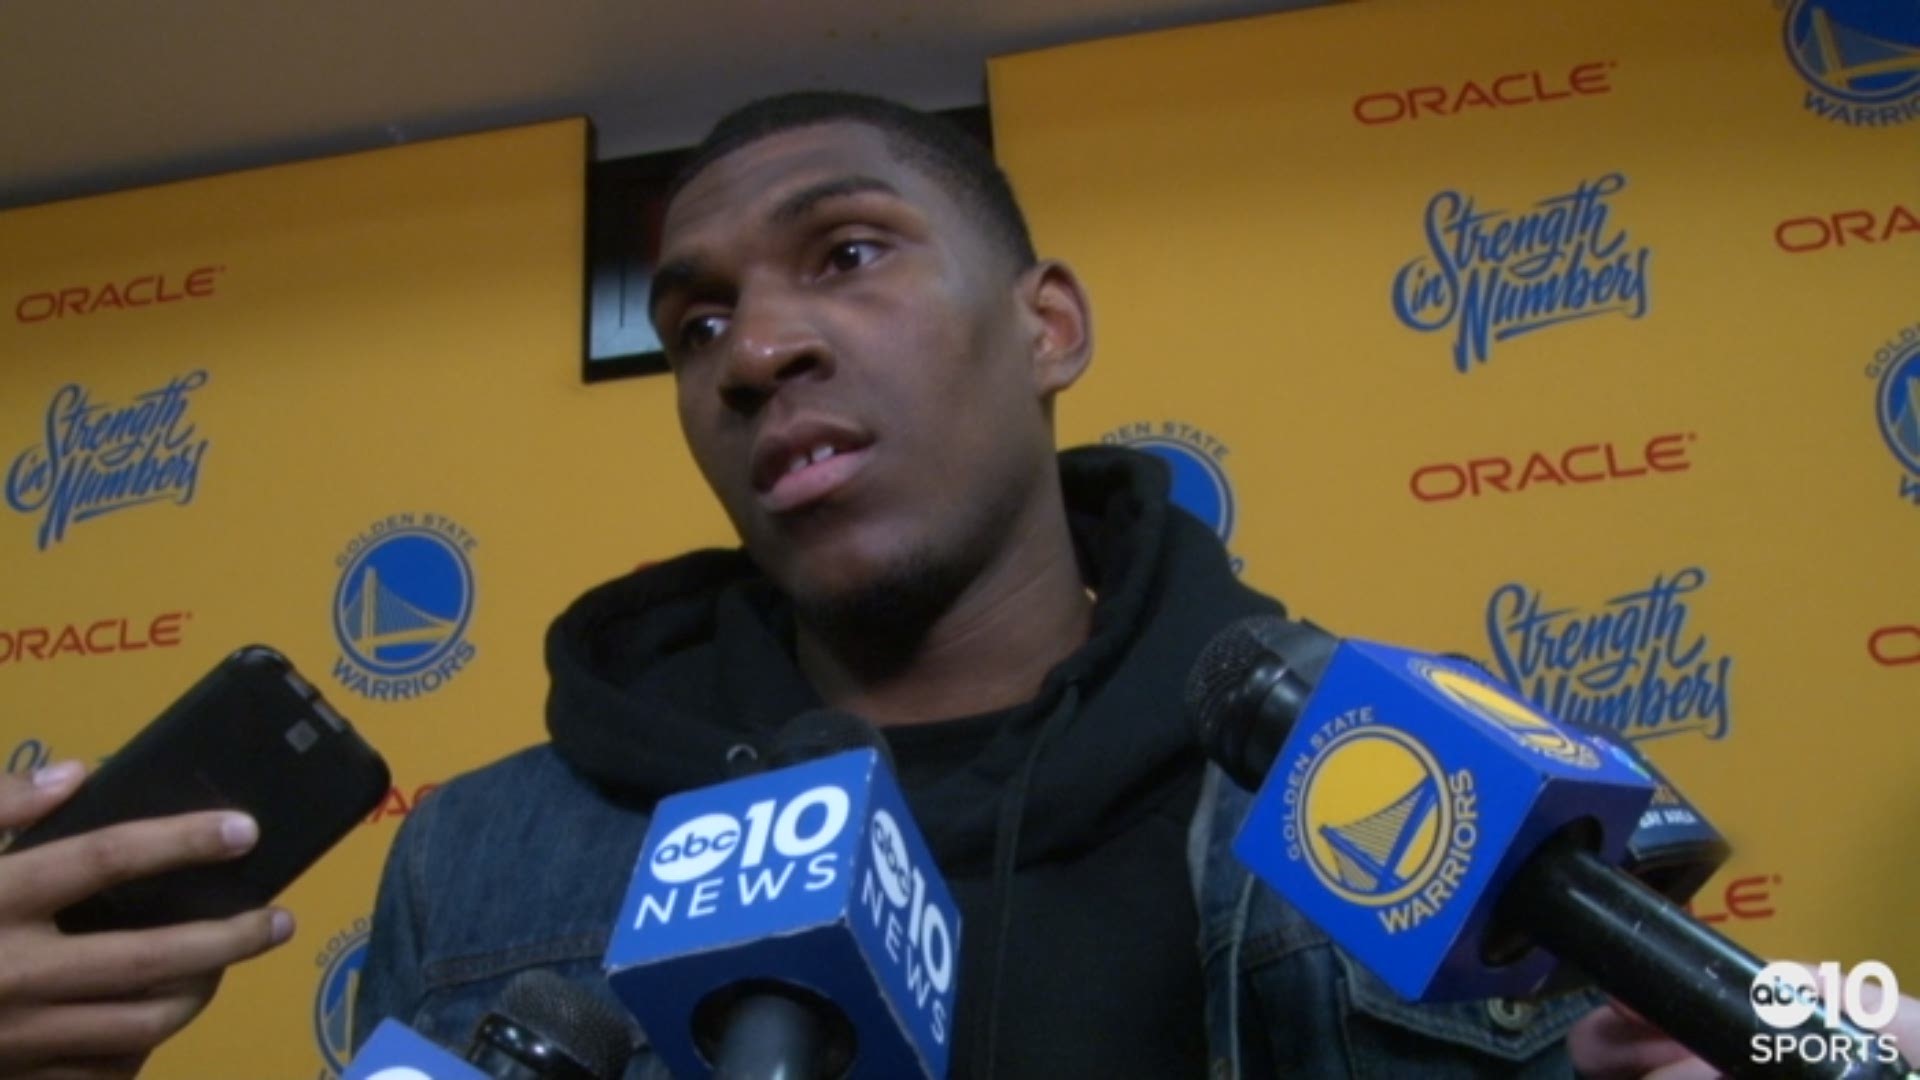 Warriors big-man Kevon Looney discusses Saturday's Game 1 playoff win over the San Antonio Spurs, the play from his teammate JaVale McGee and making a statement with the one-sided victory.